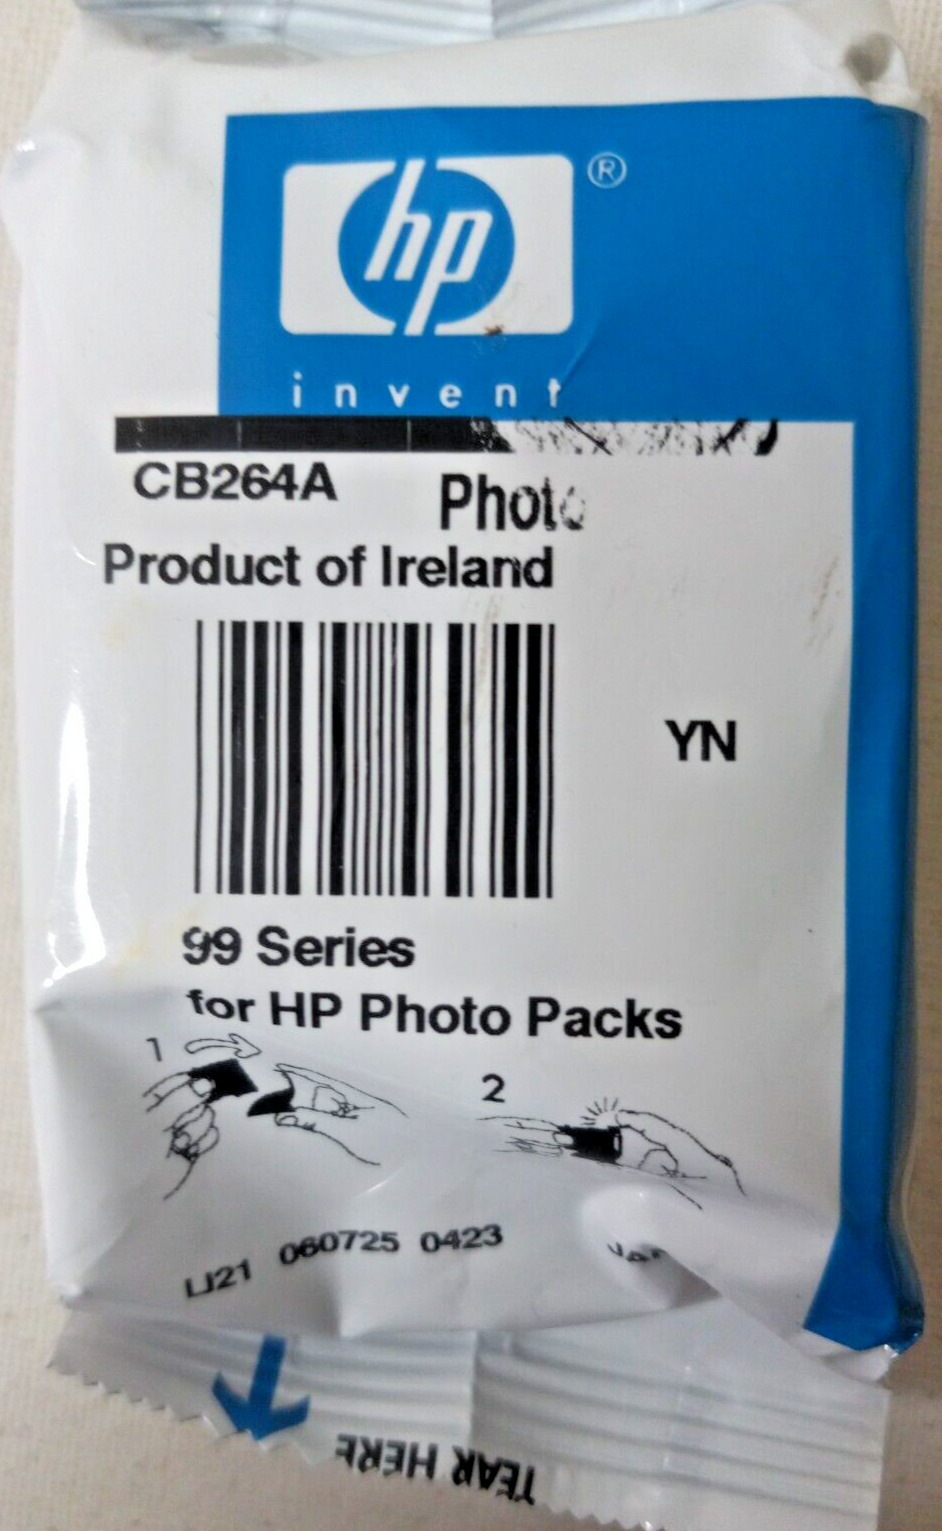 HP invent CB264A Photo 99 Series for HP Photo Packs